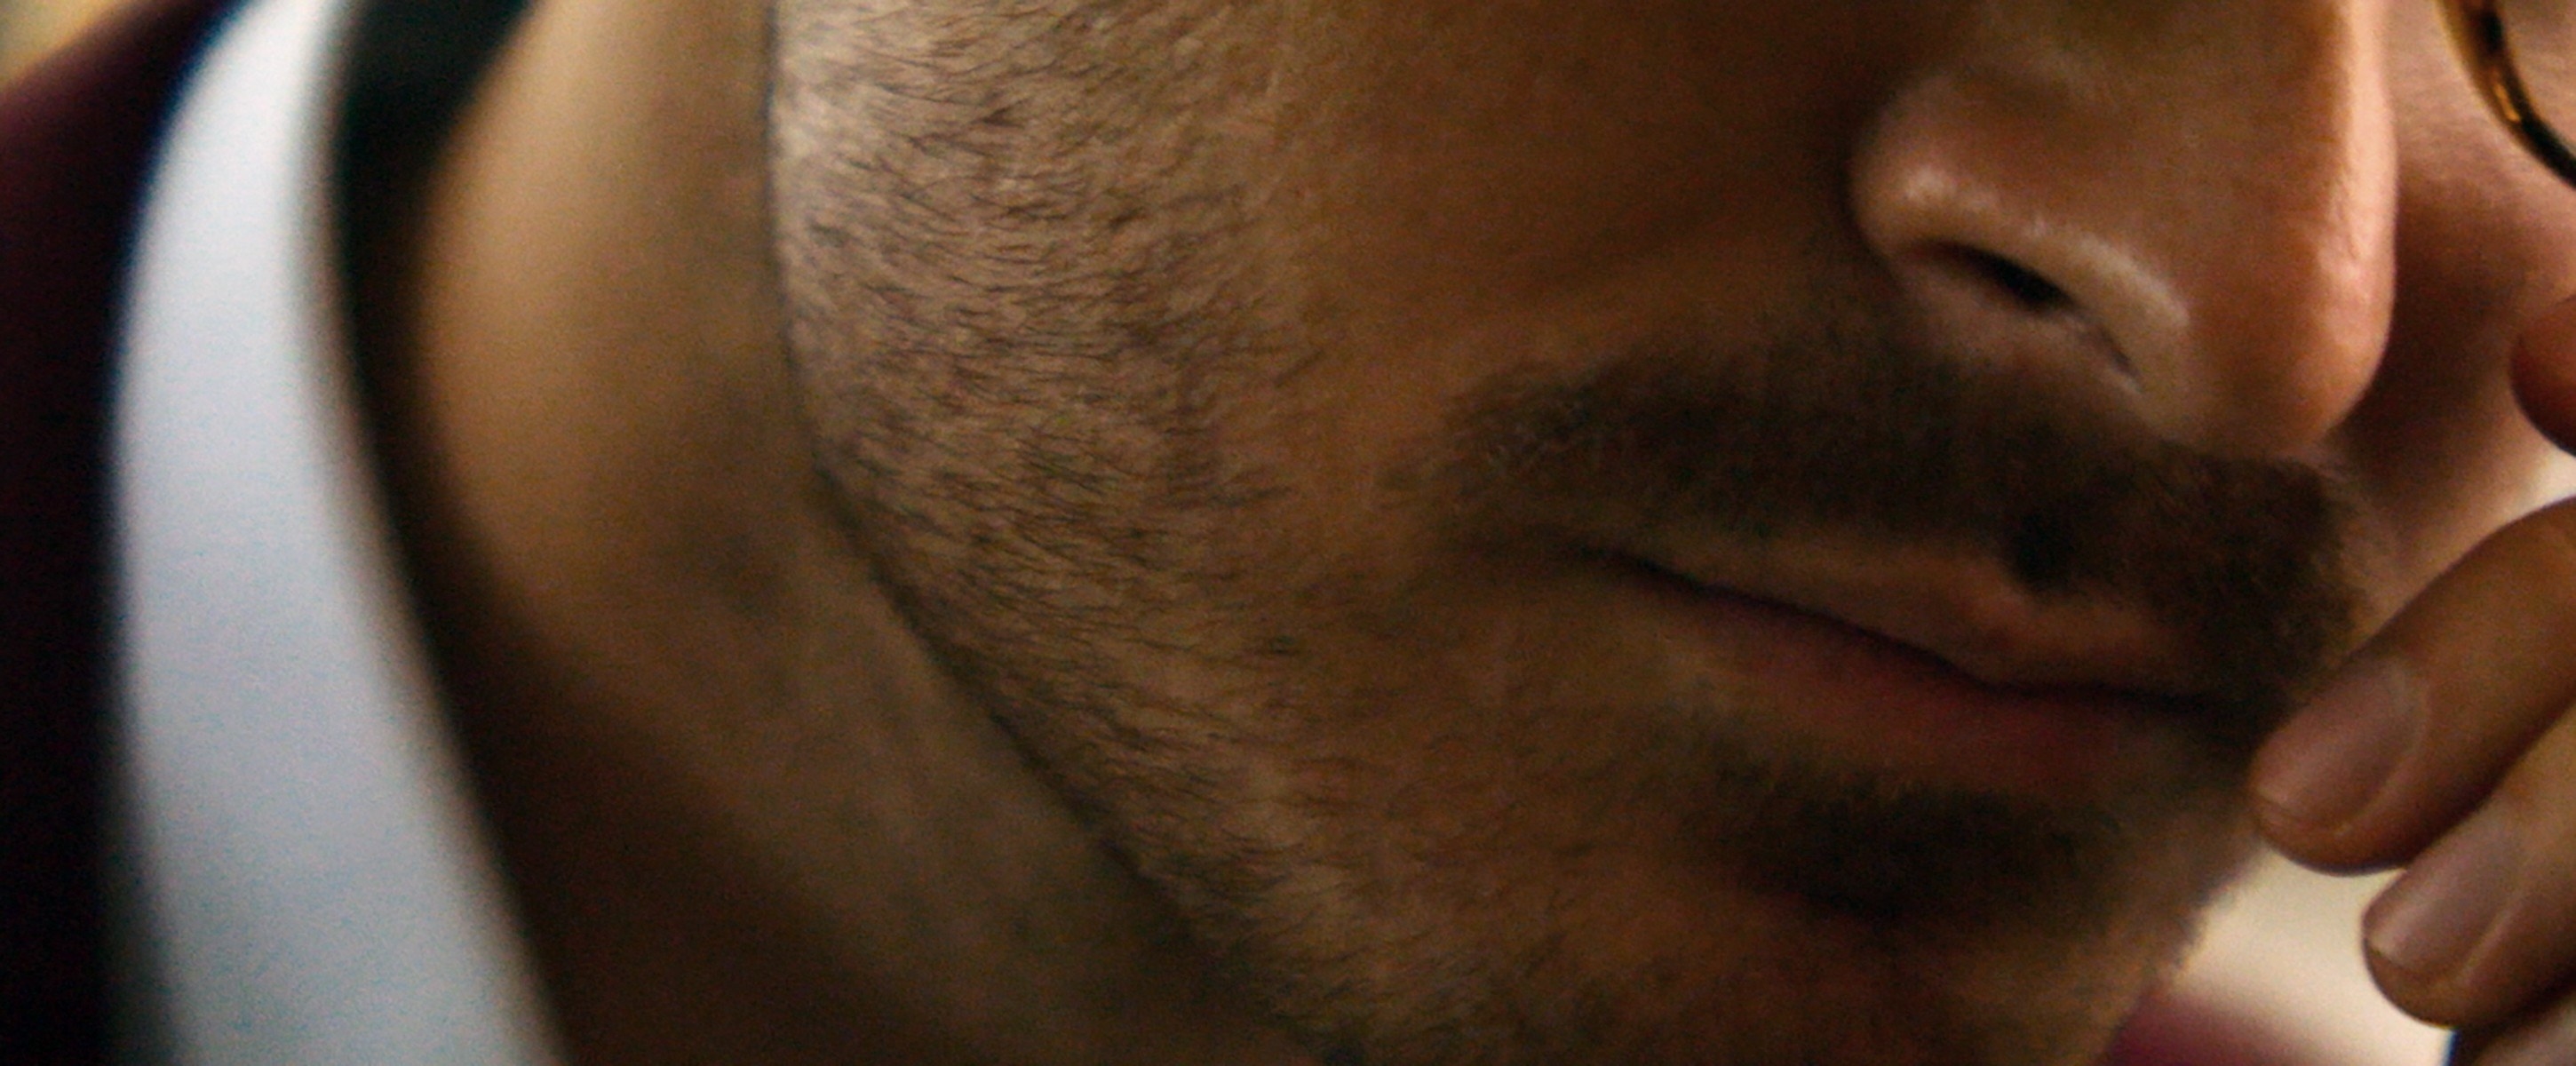 Close-up of the bottom half of his face